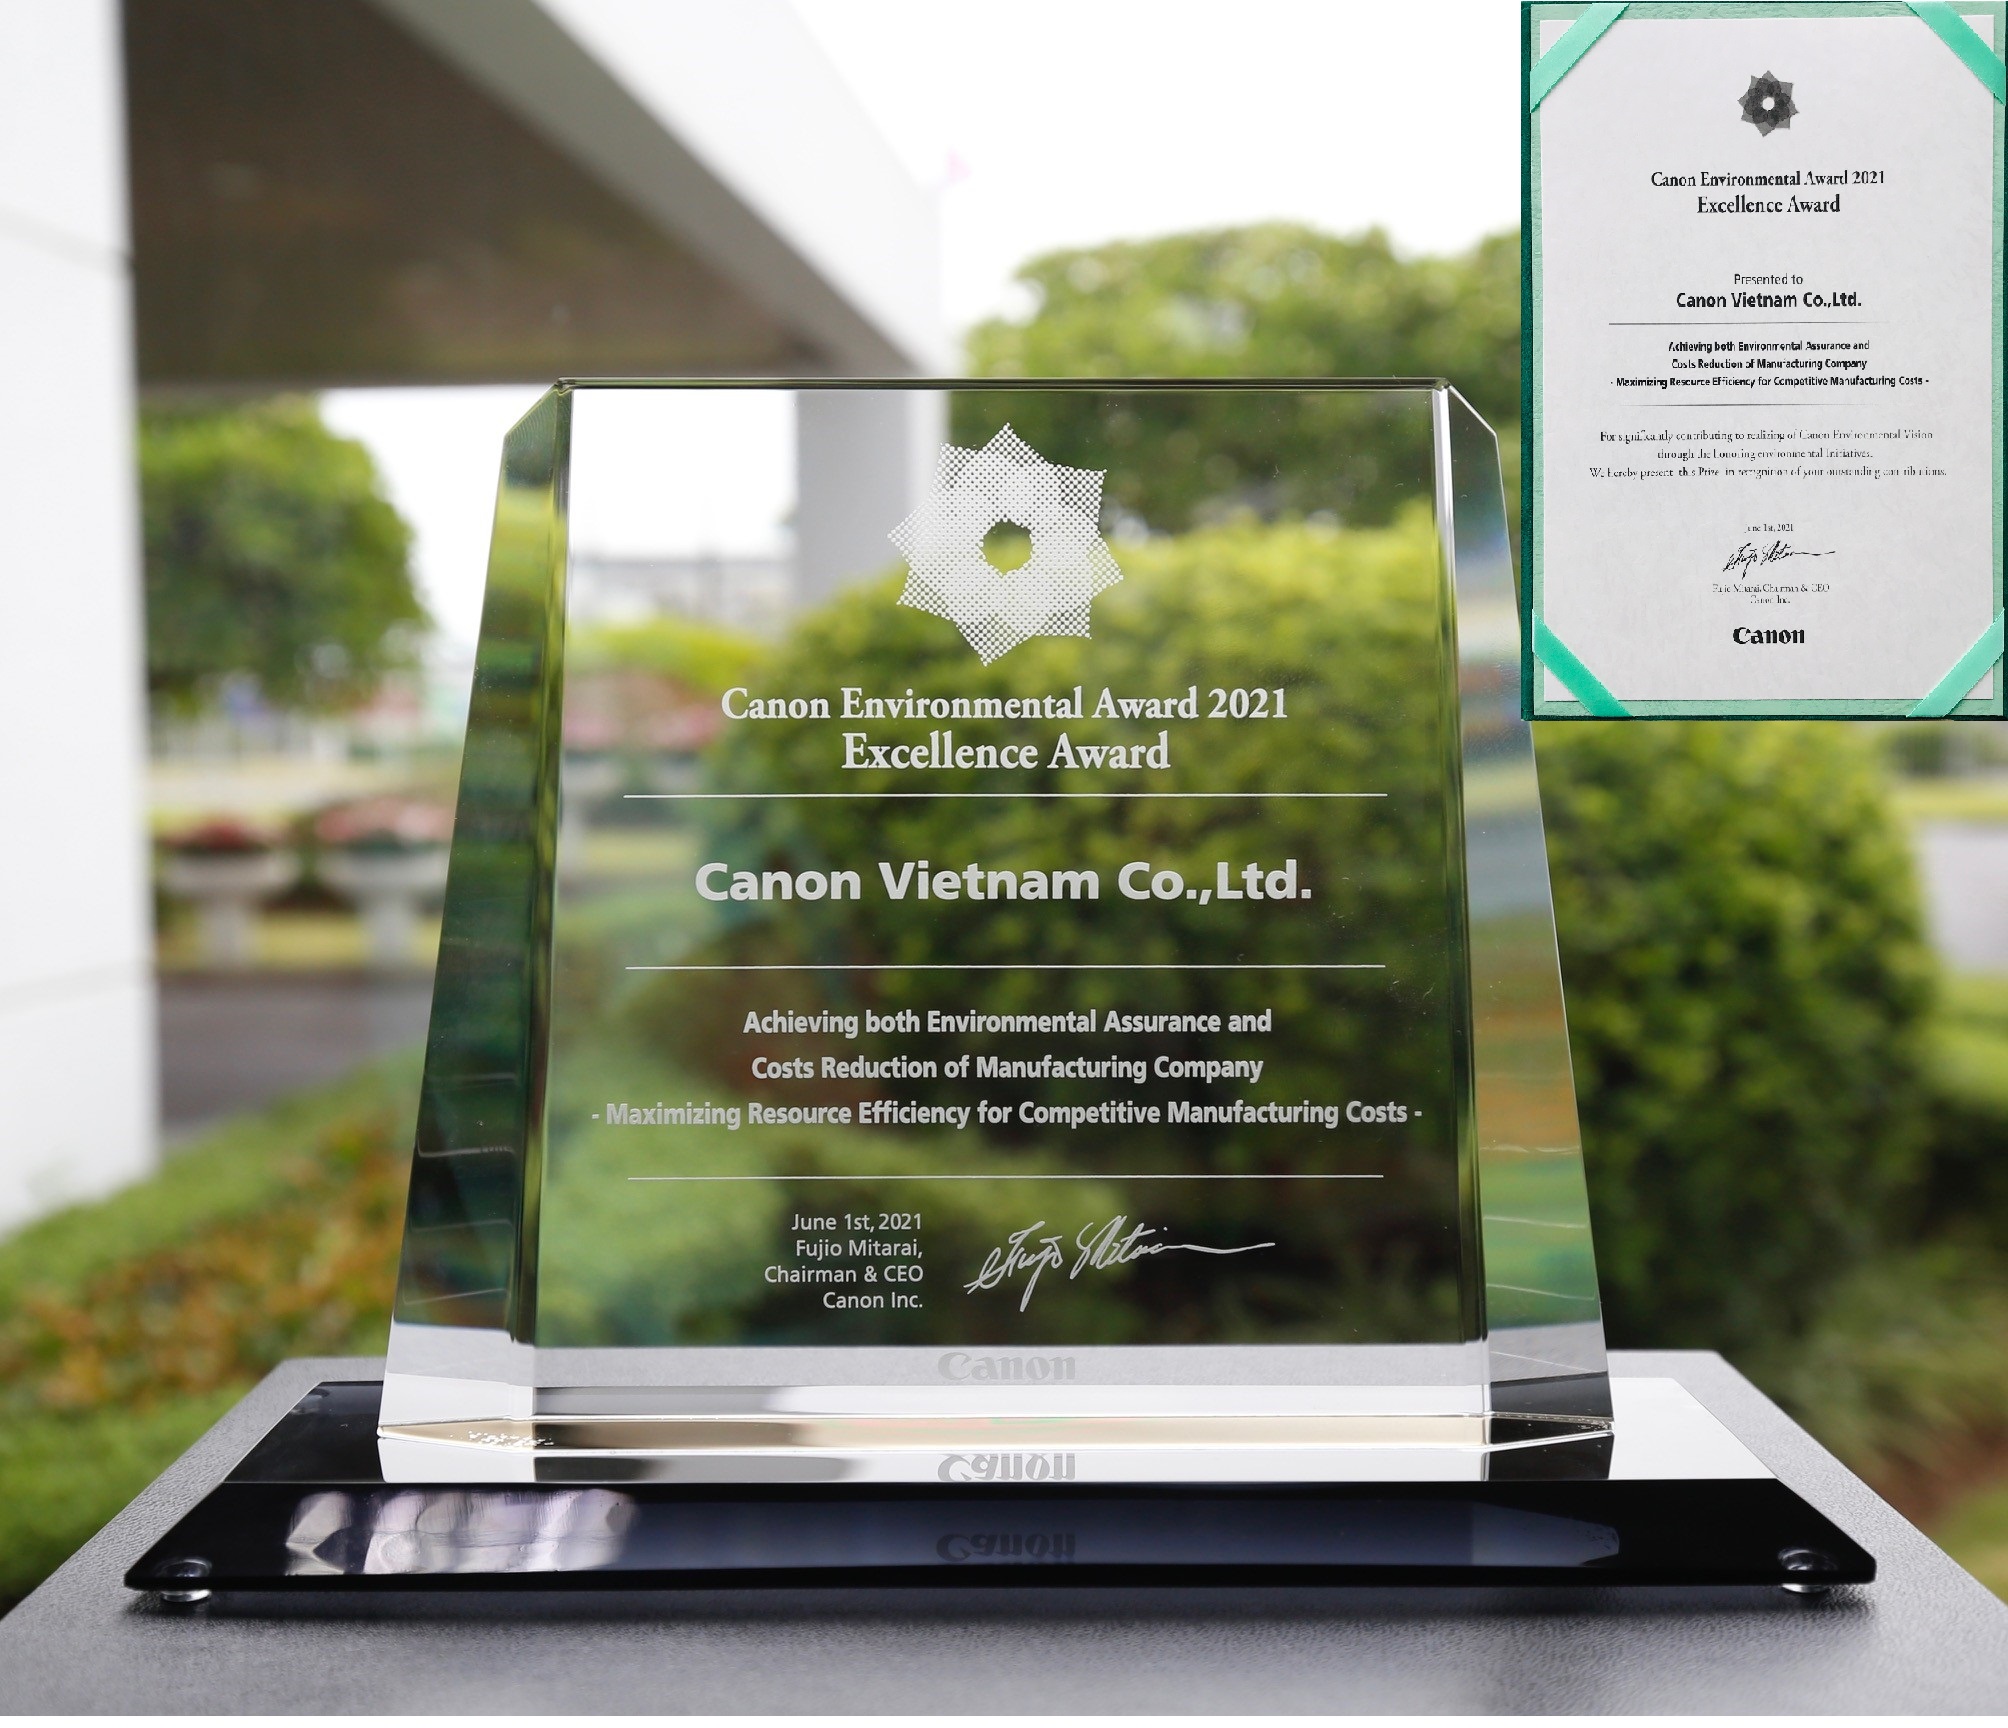 Receive Canon environment award 2021 “For balancing environmental assurance and cost reduction”